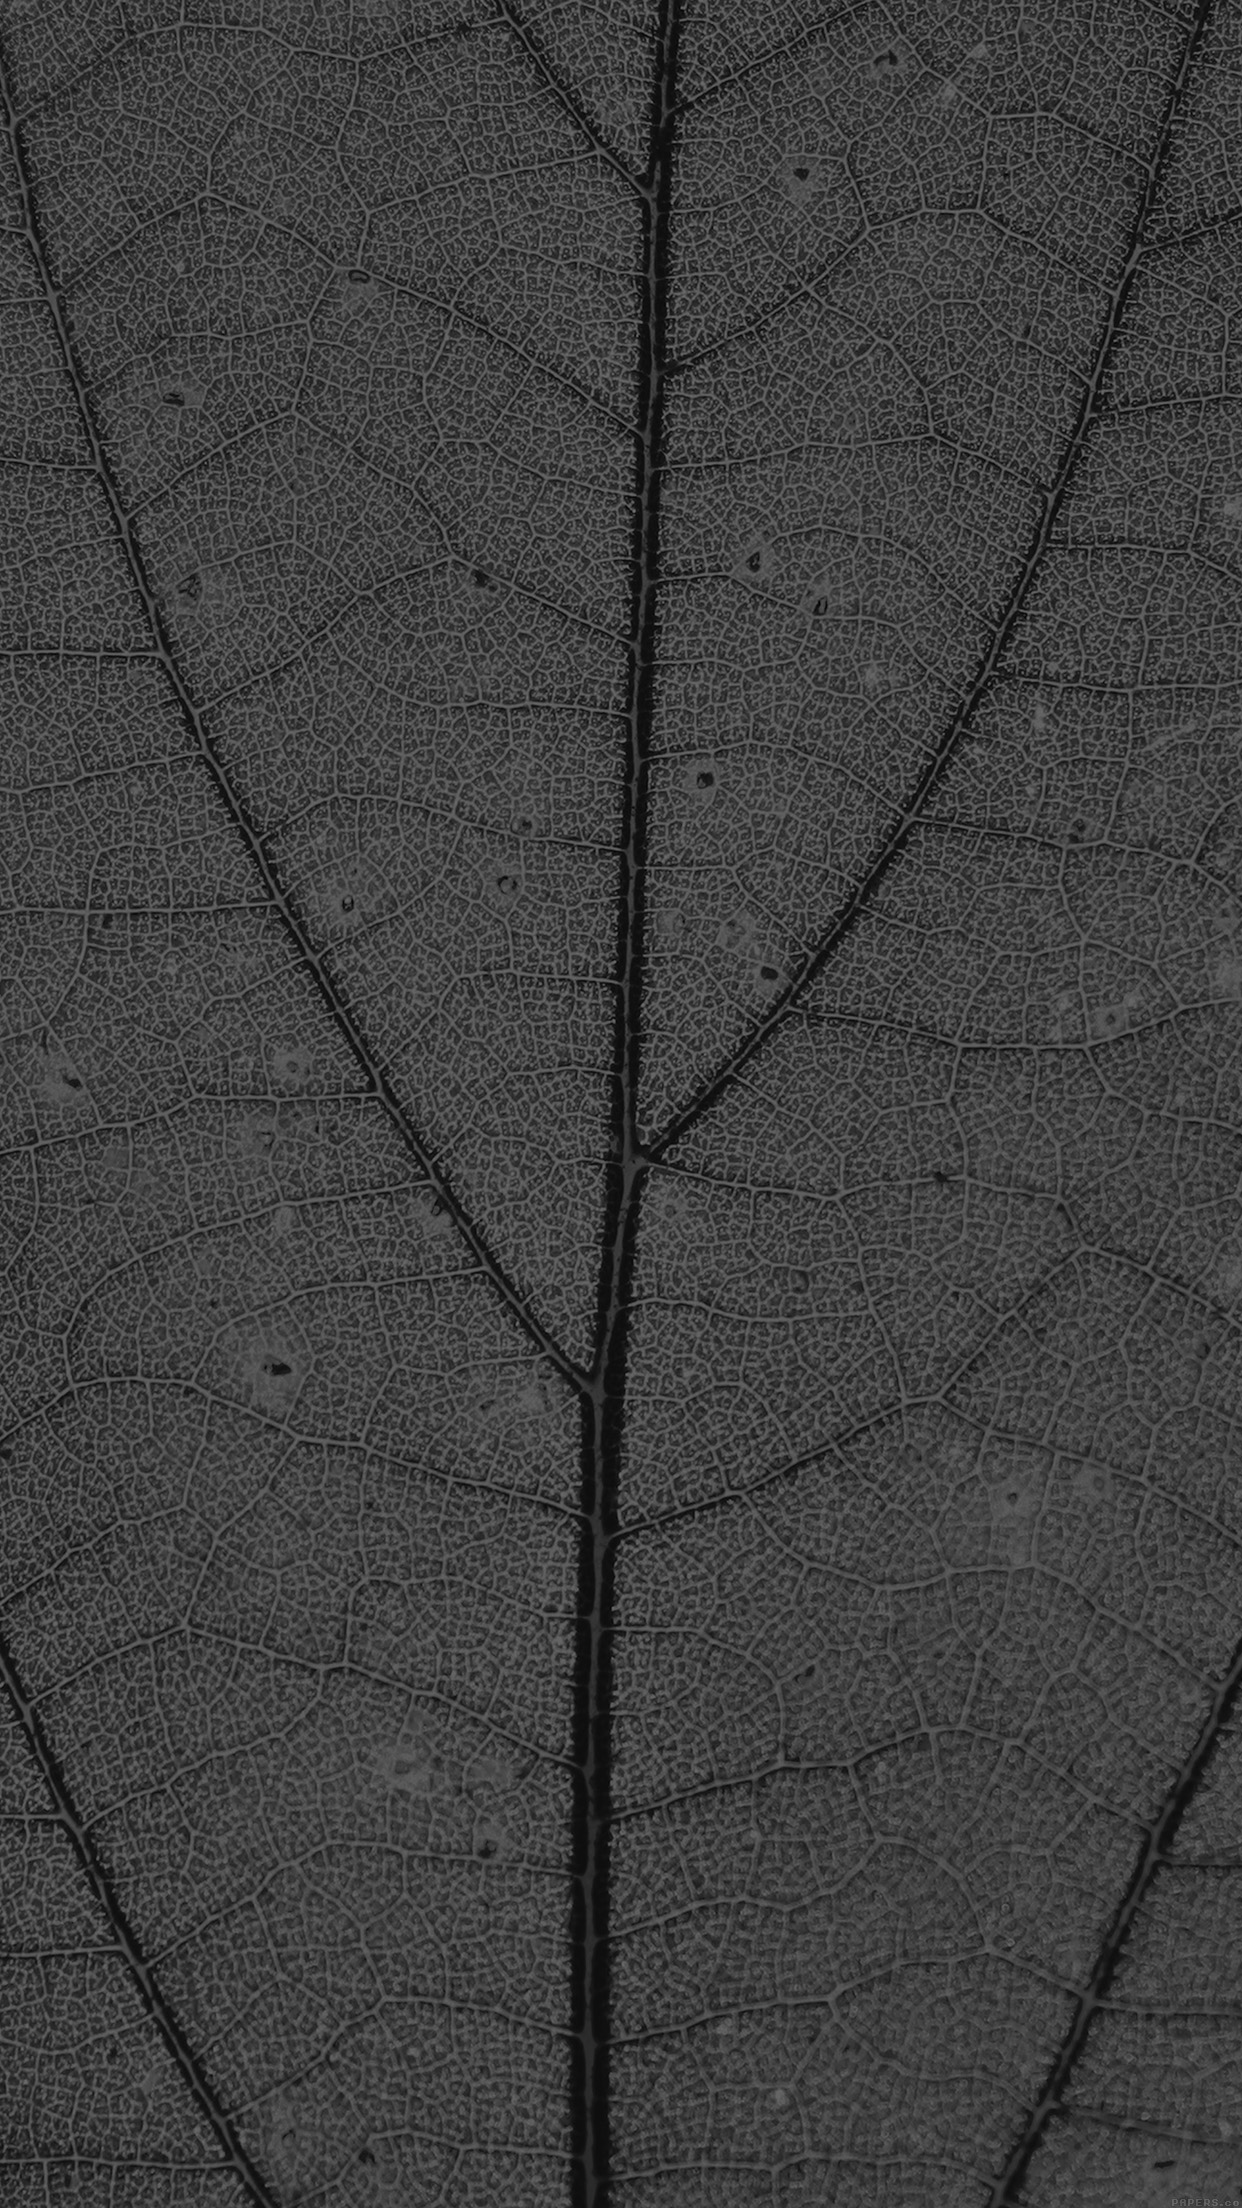 Dark Leaf Texture Nature Pattern Android wallpaper